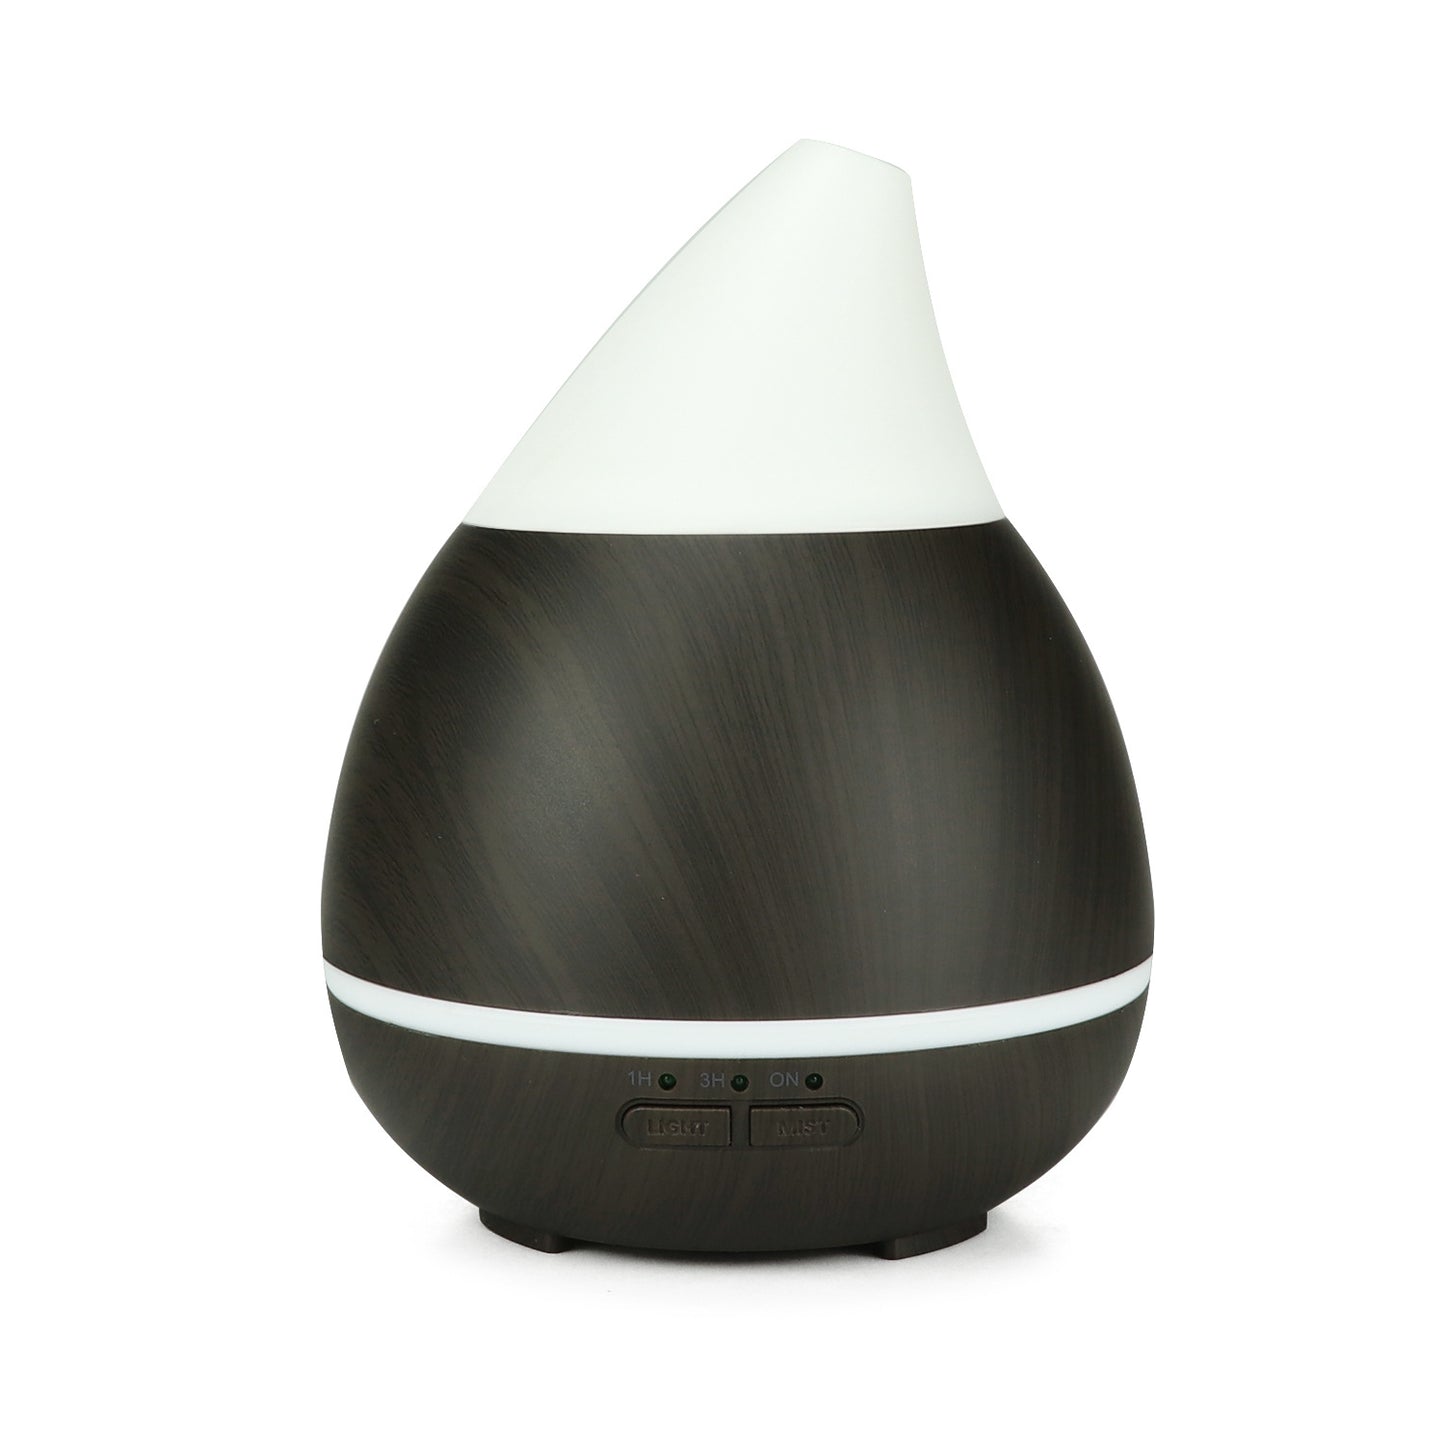 New Ultrasonic Aroma Diffuser 150ml Colorful Cold Mist Desktop Atomizing Humidifier - storage